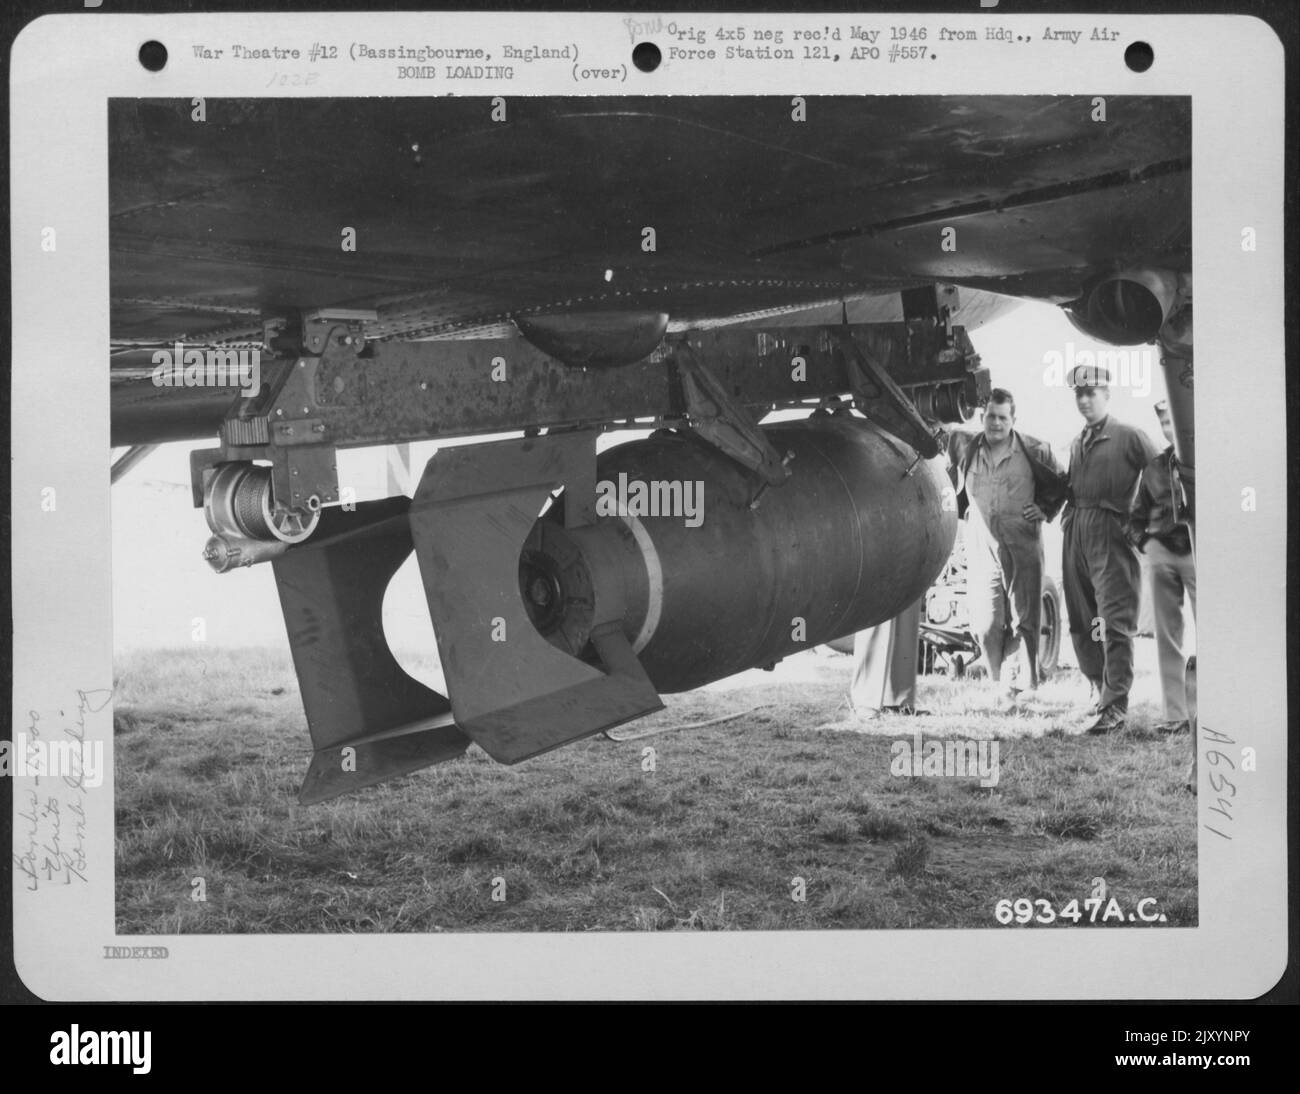 Armorers Of The 91St Bomb Group Load 1,000 Lb. Bombs On The New External Bomb Rack, Under The Wing Of A Boeing B-17 'Flying Fortress' At The 91St Bomb Group Base In Basinbourne, England. 14 September 1943. Stock Photo